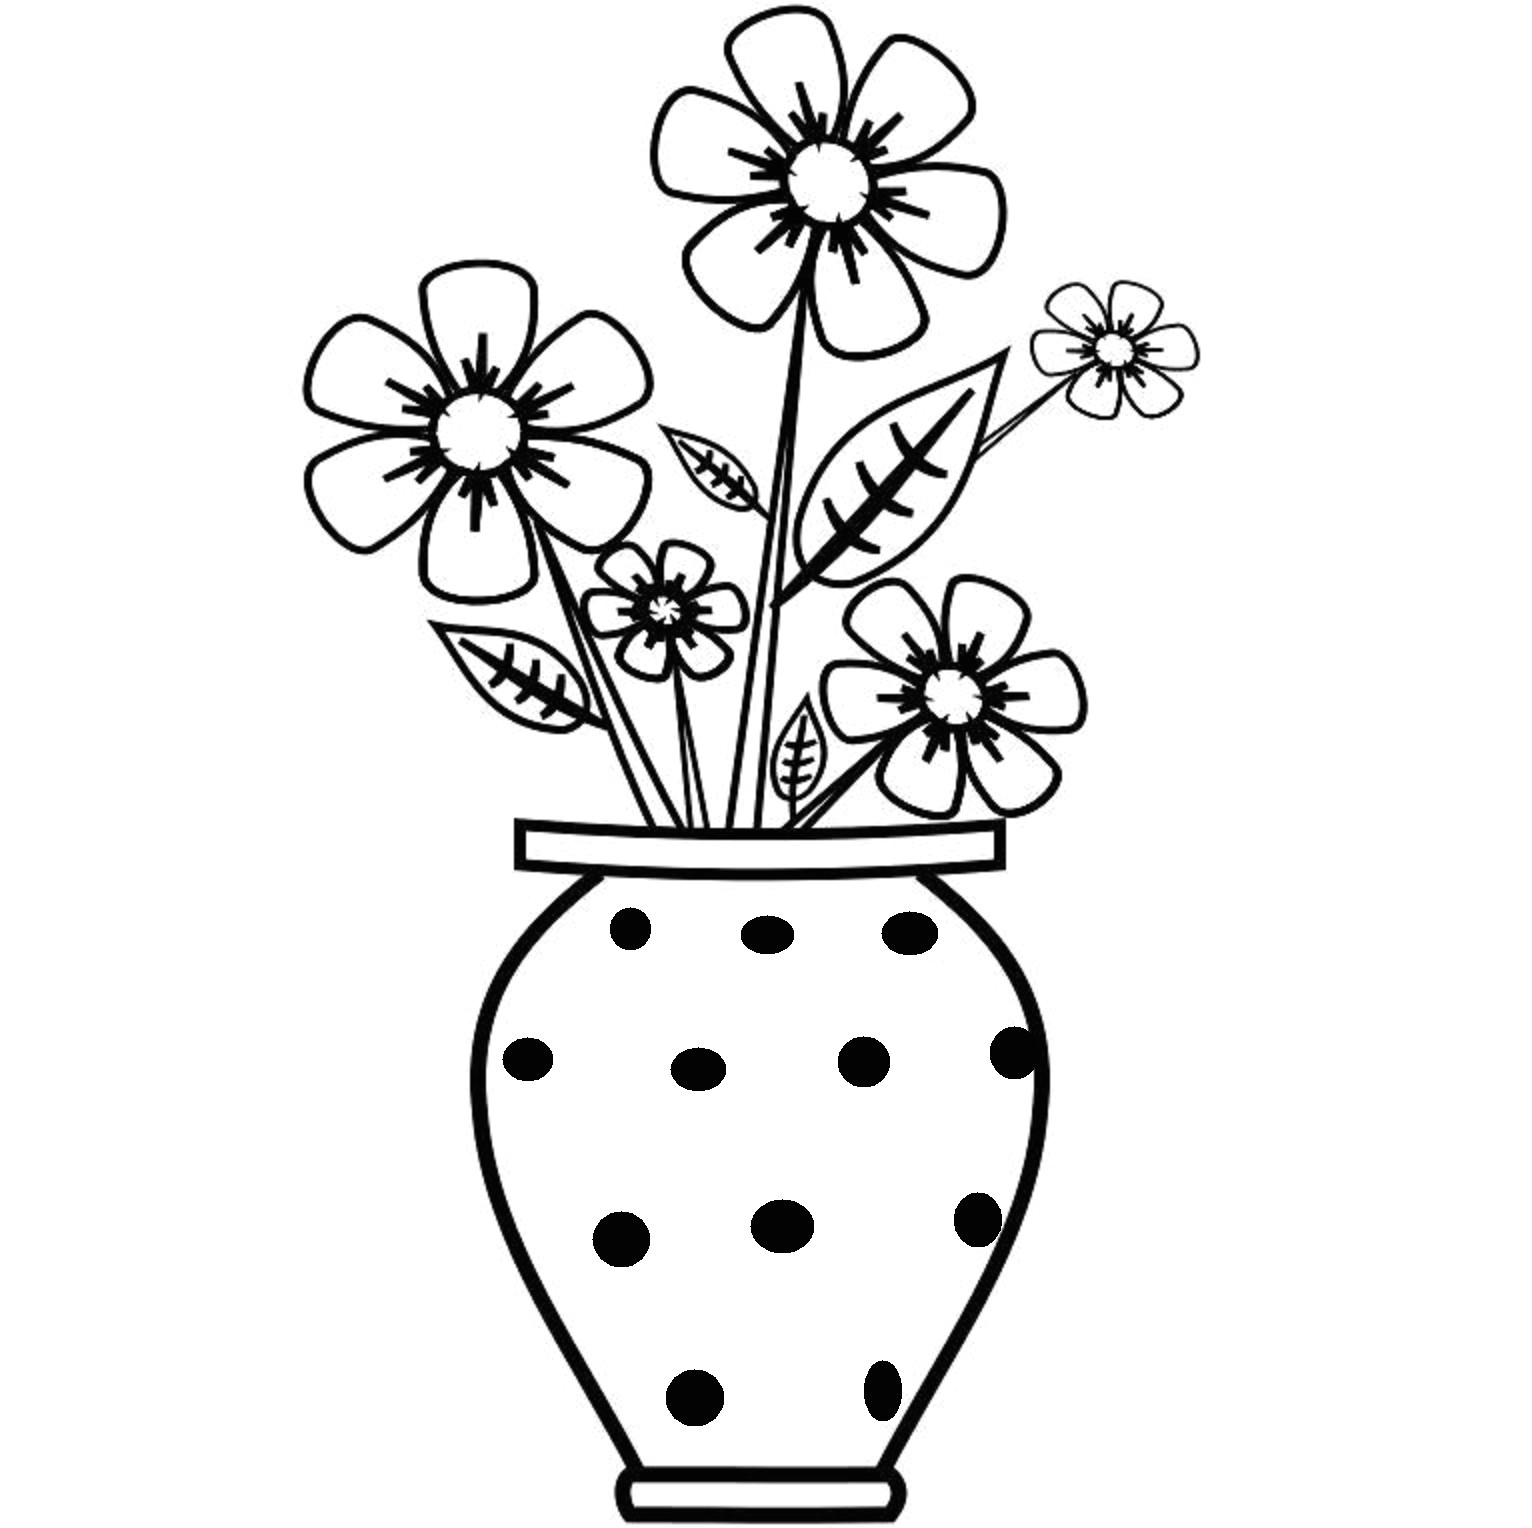 Drawings Of Flower Pot Flowers to Draw Easy Step by Step Flower Pot for Drawing Sketches